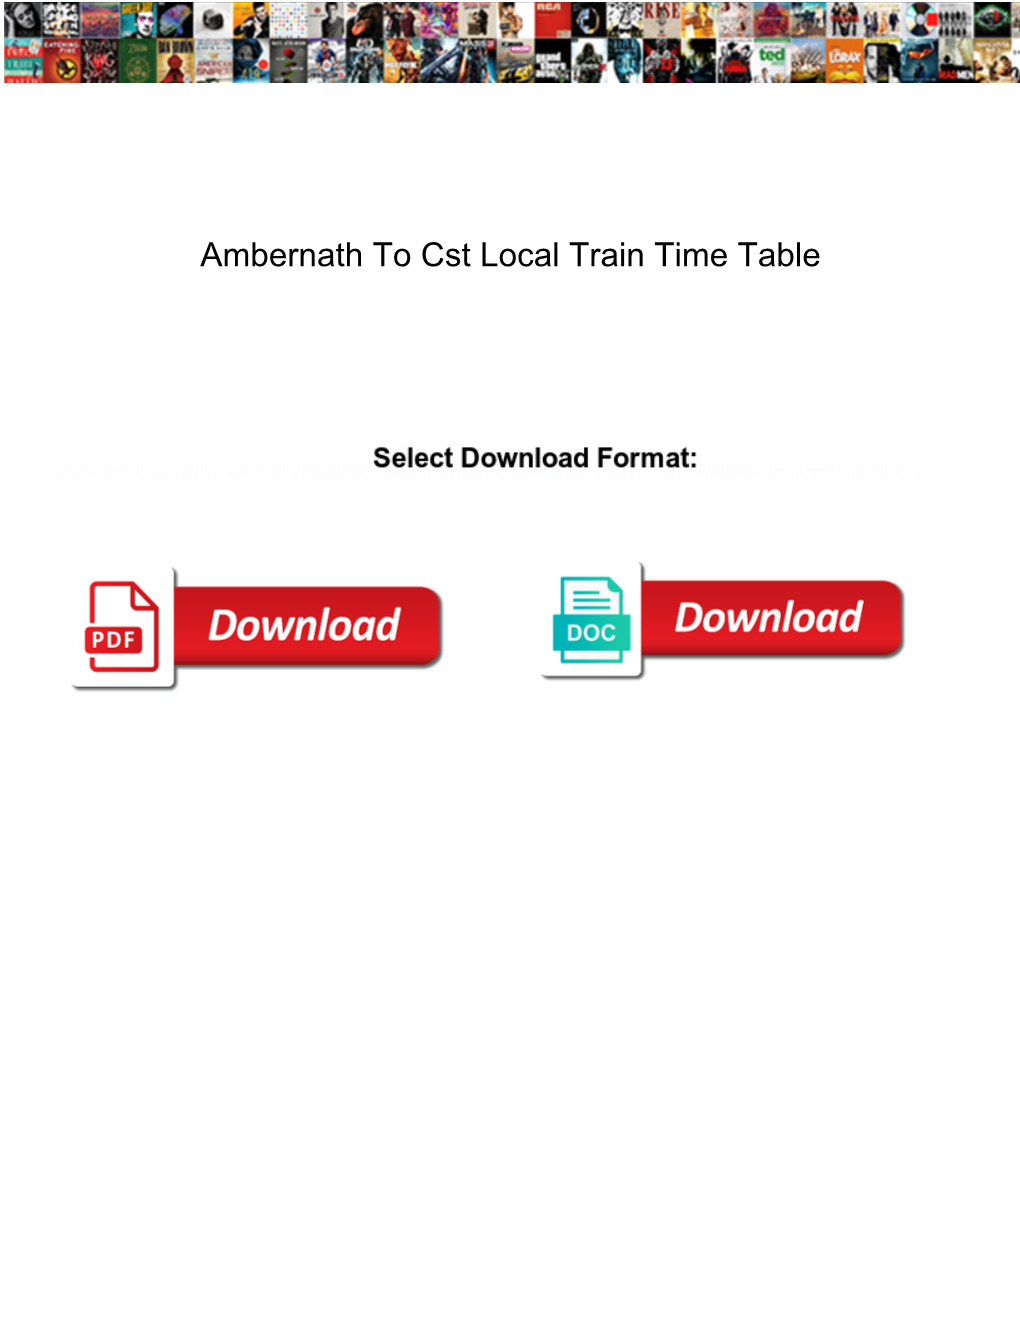 Ambernath to Cst Local Train Time Table